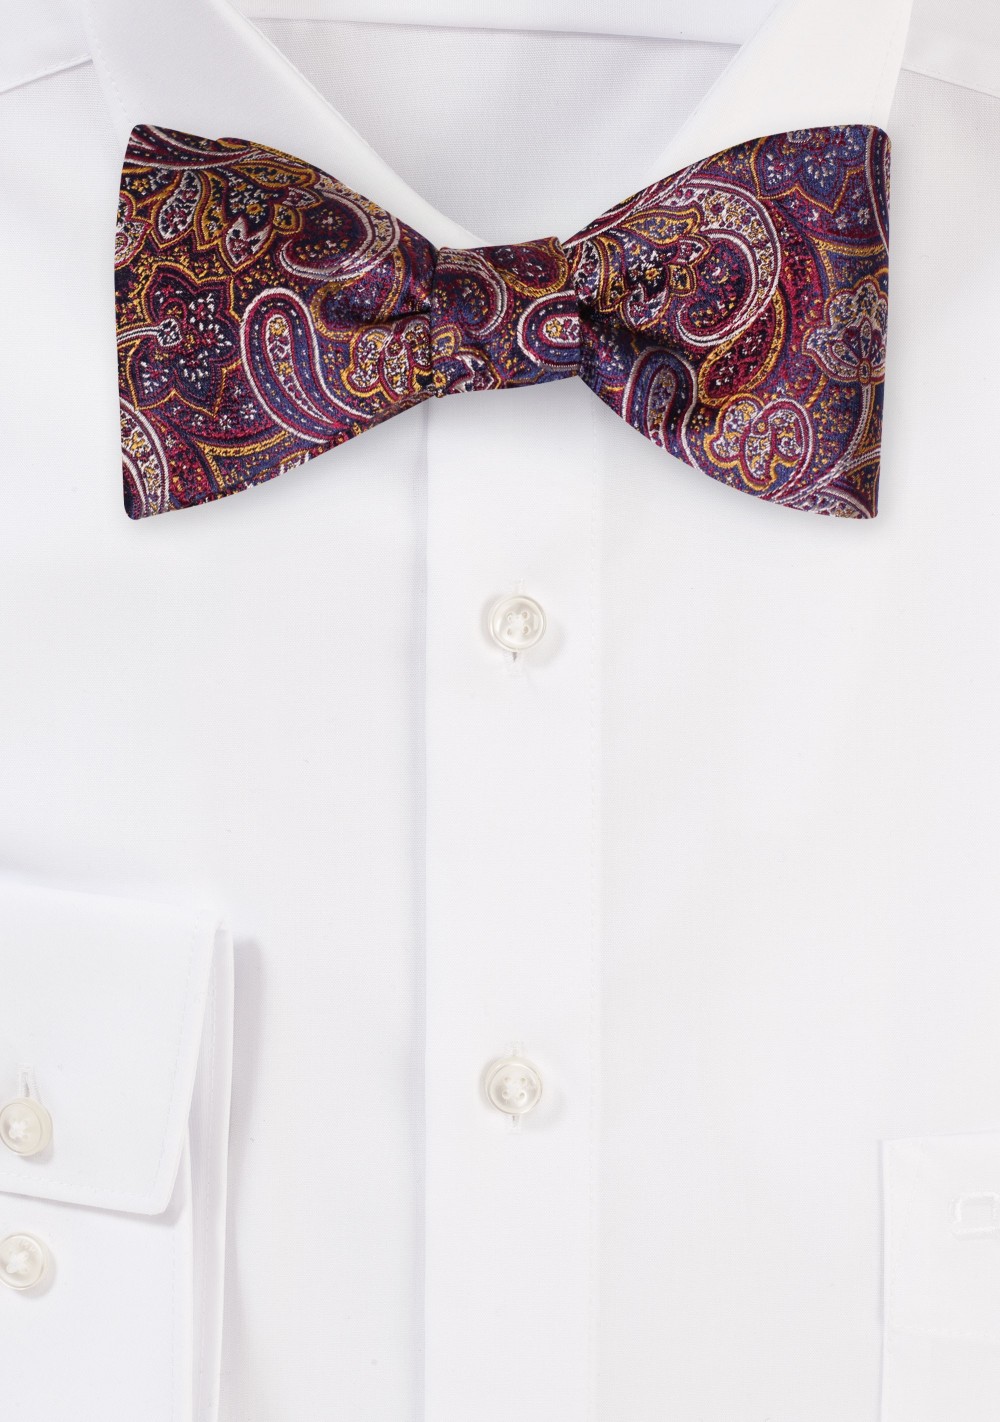 Self Tie Paisley Bow Tie in Burgundy and Gold